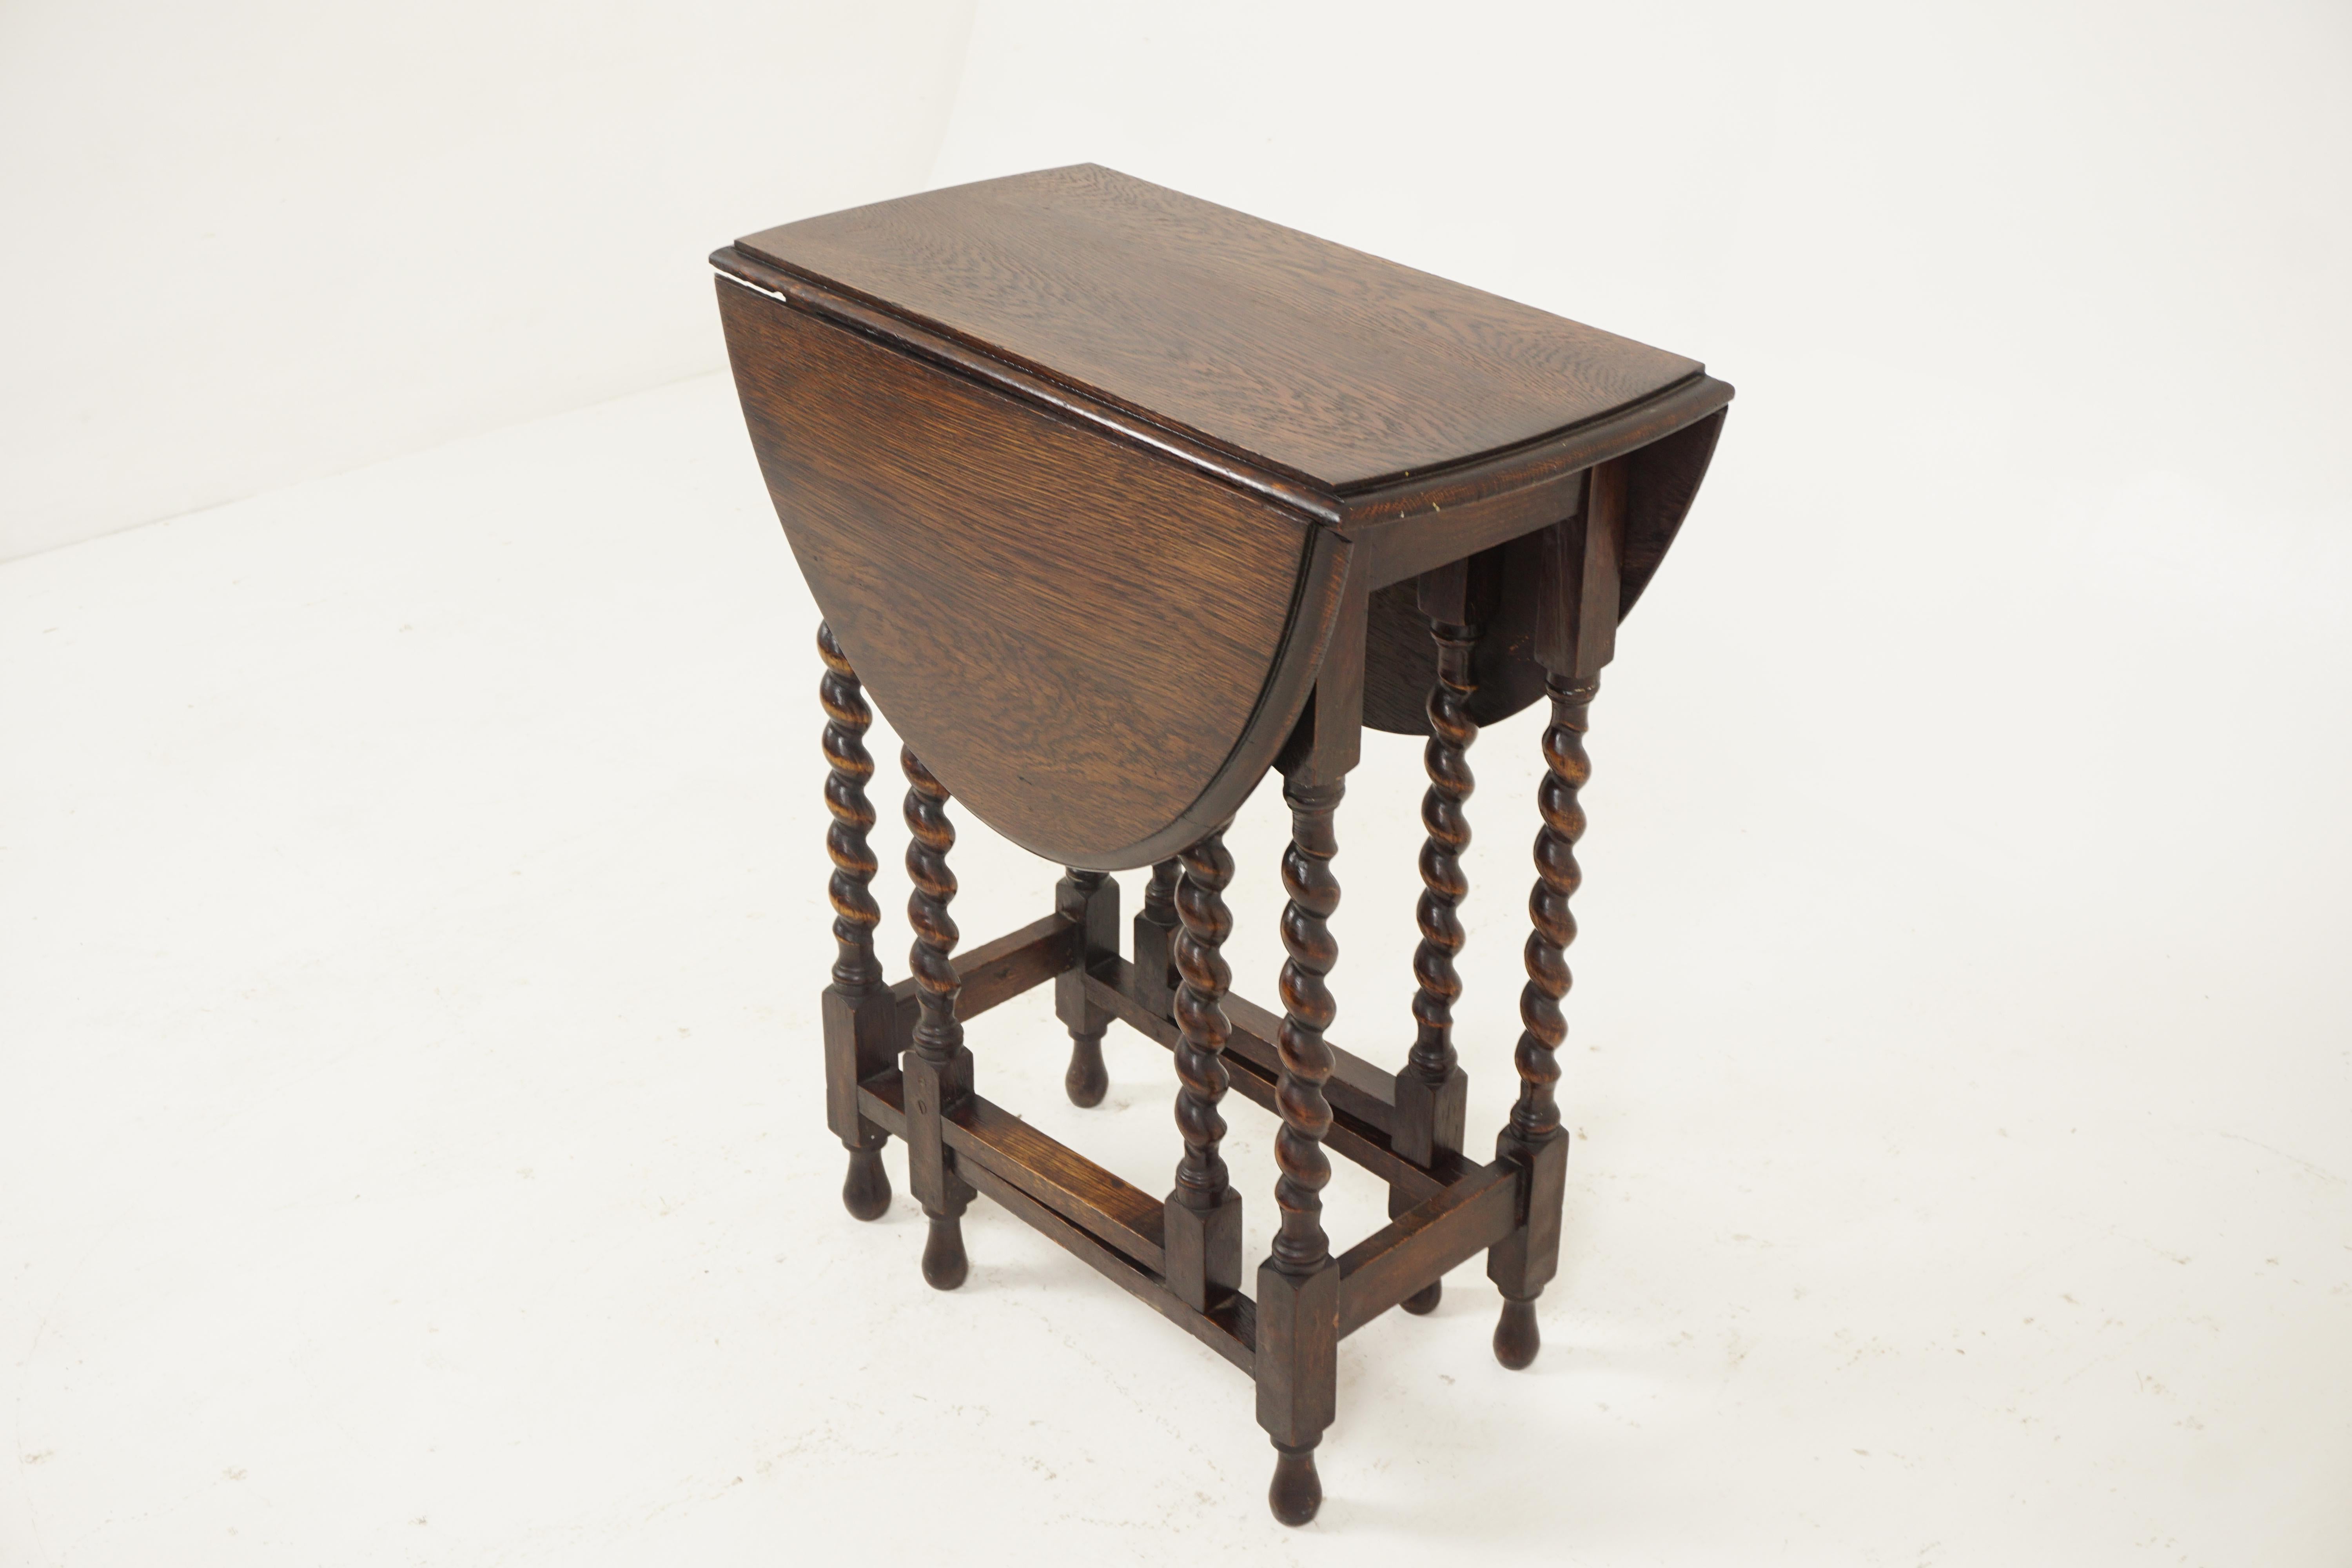 Antique Gateleg table, oak, barley twist drop leaf table, Scotland 1920, B2651

Scotland 1920
Solid oak
Original finish
Solid oak with drop leaves to the sides
All standing on eight barley twist legs
Connected by stretchers to the base
Nice